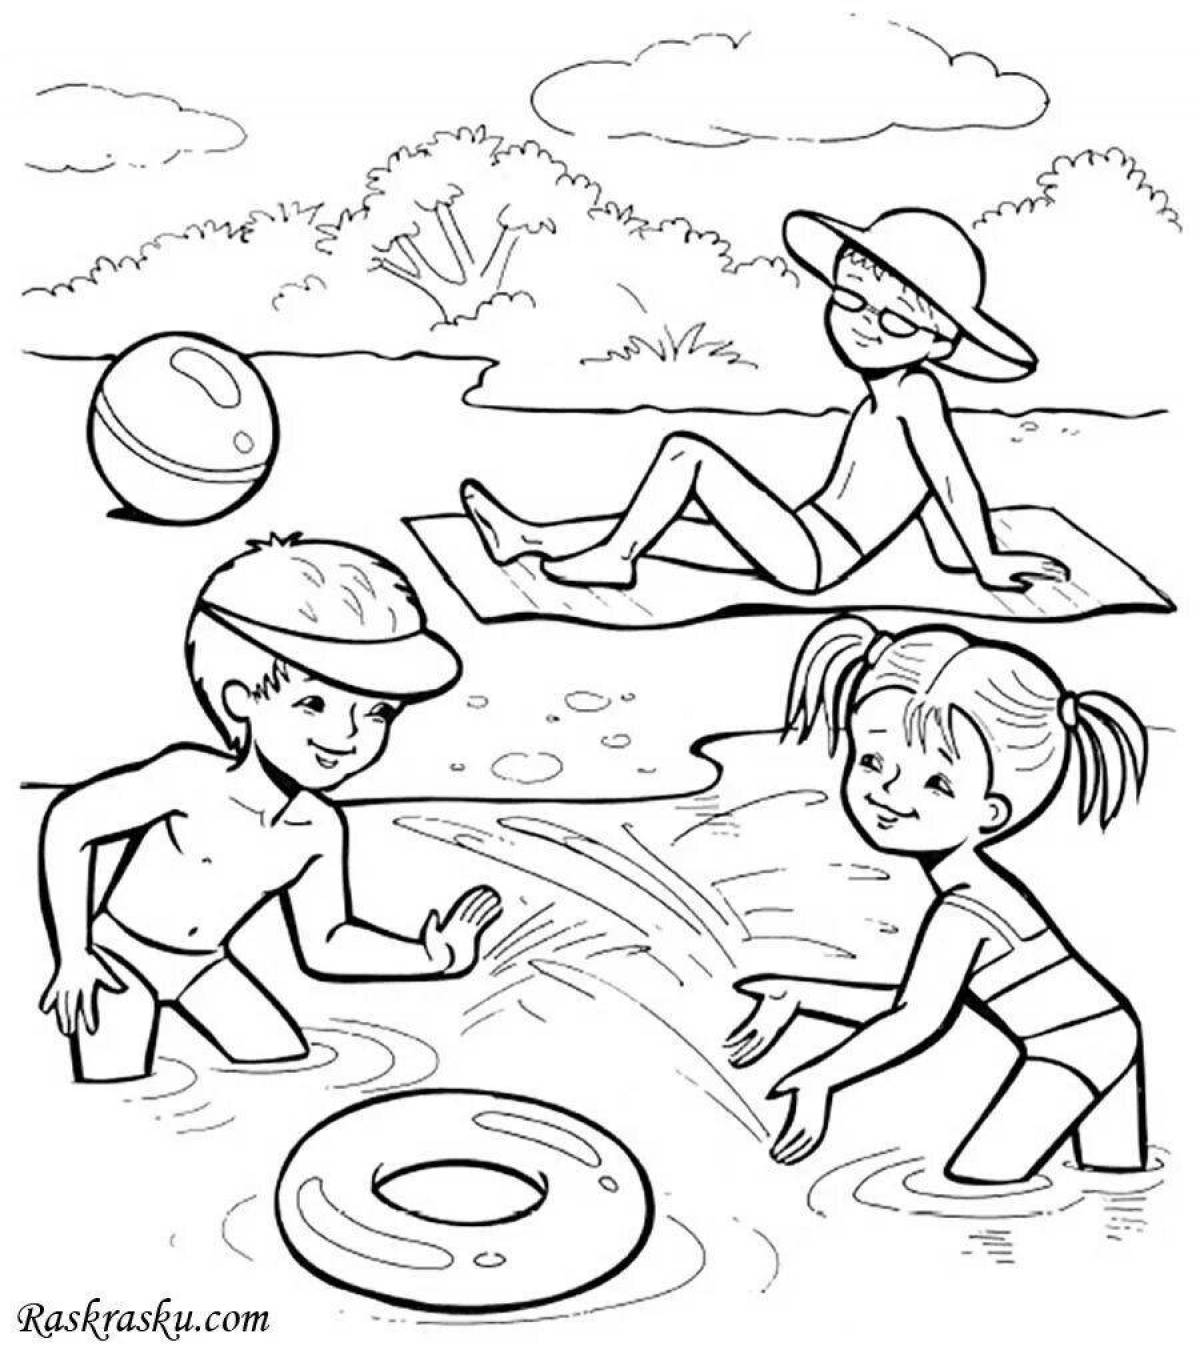 Coloured summer coloring for children